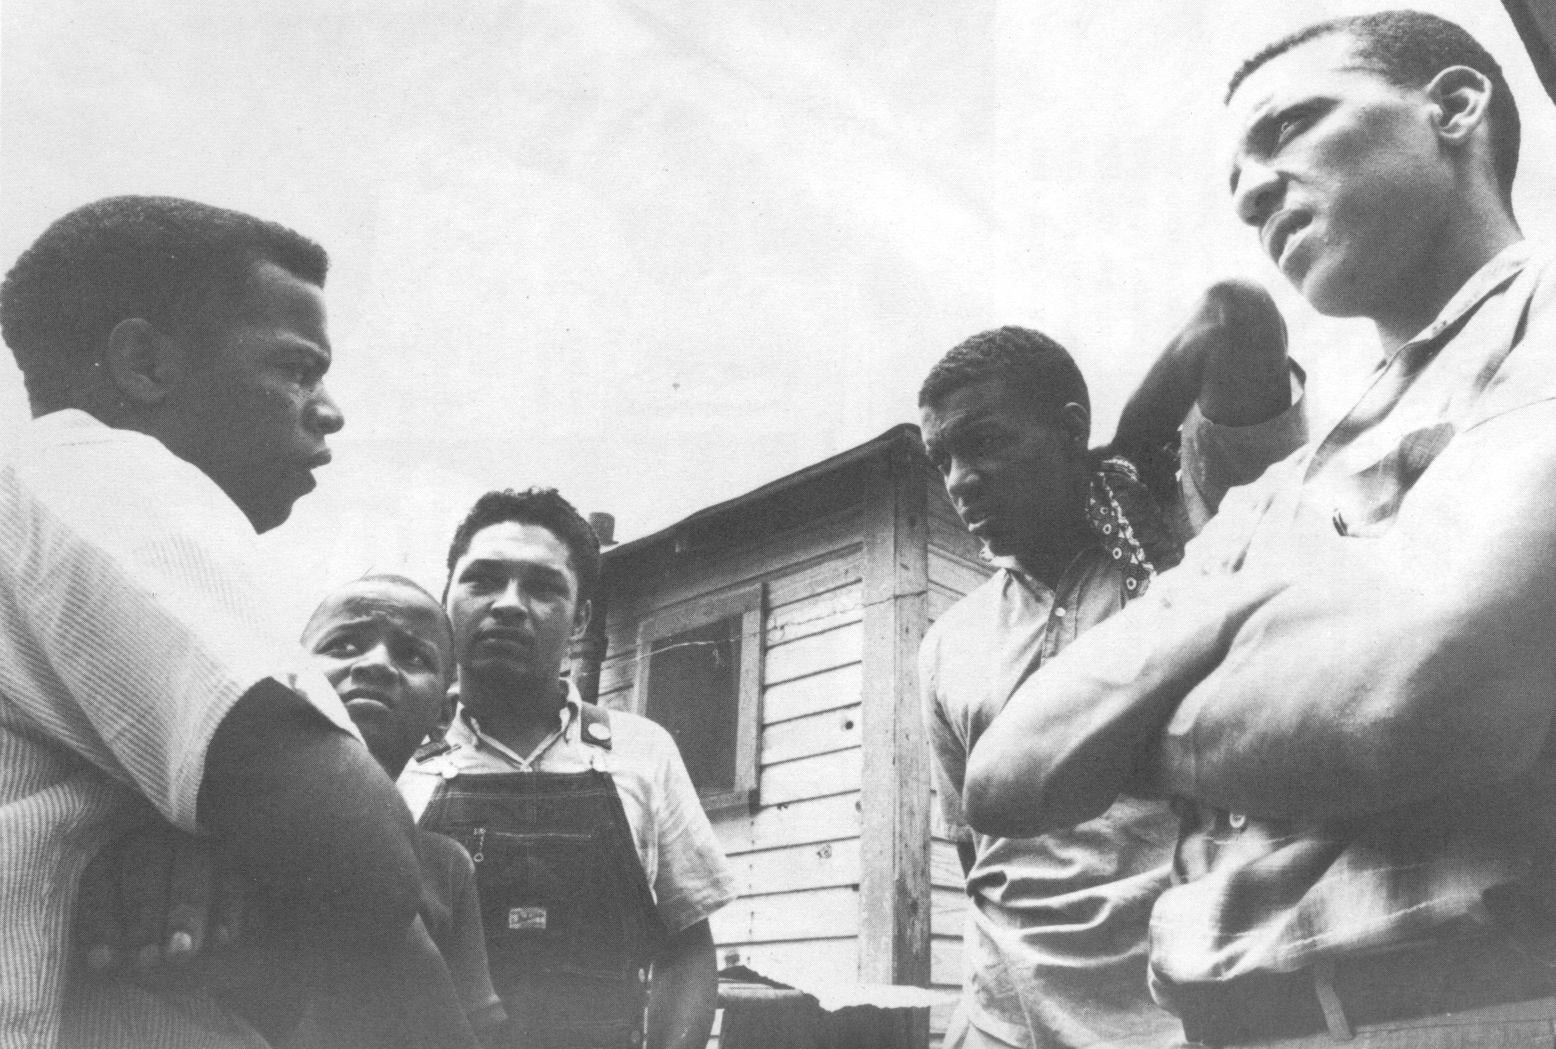 Left to Right: John Lewis (SNCC), unidentified boy, Mateo 